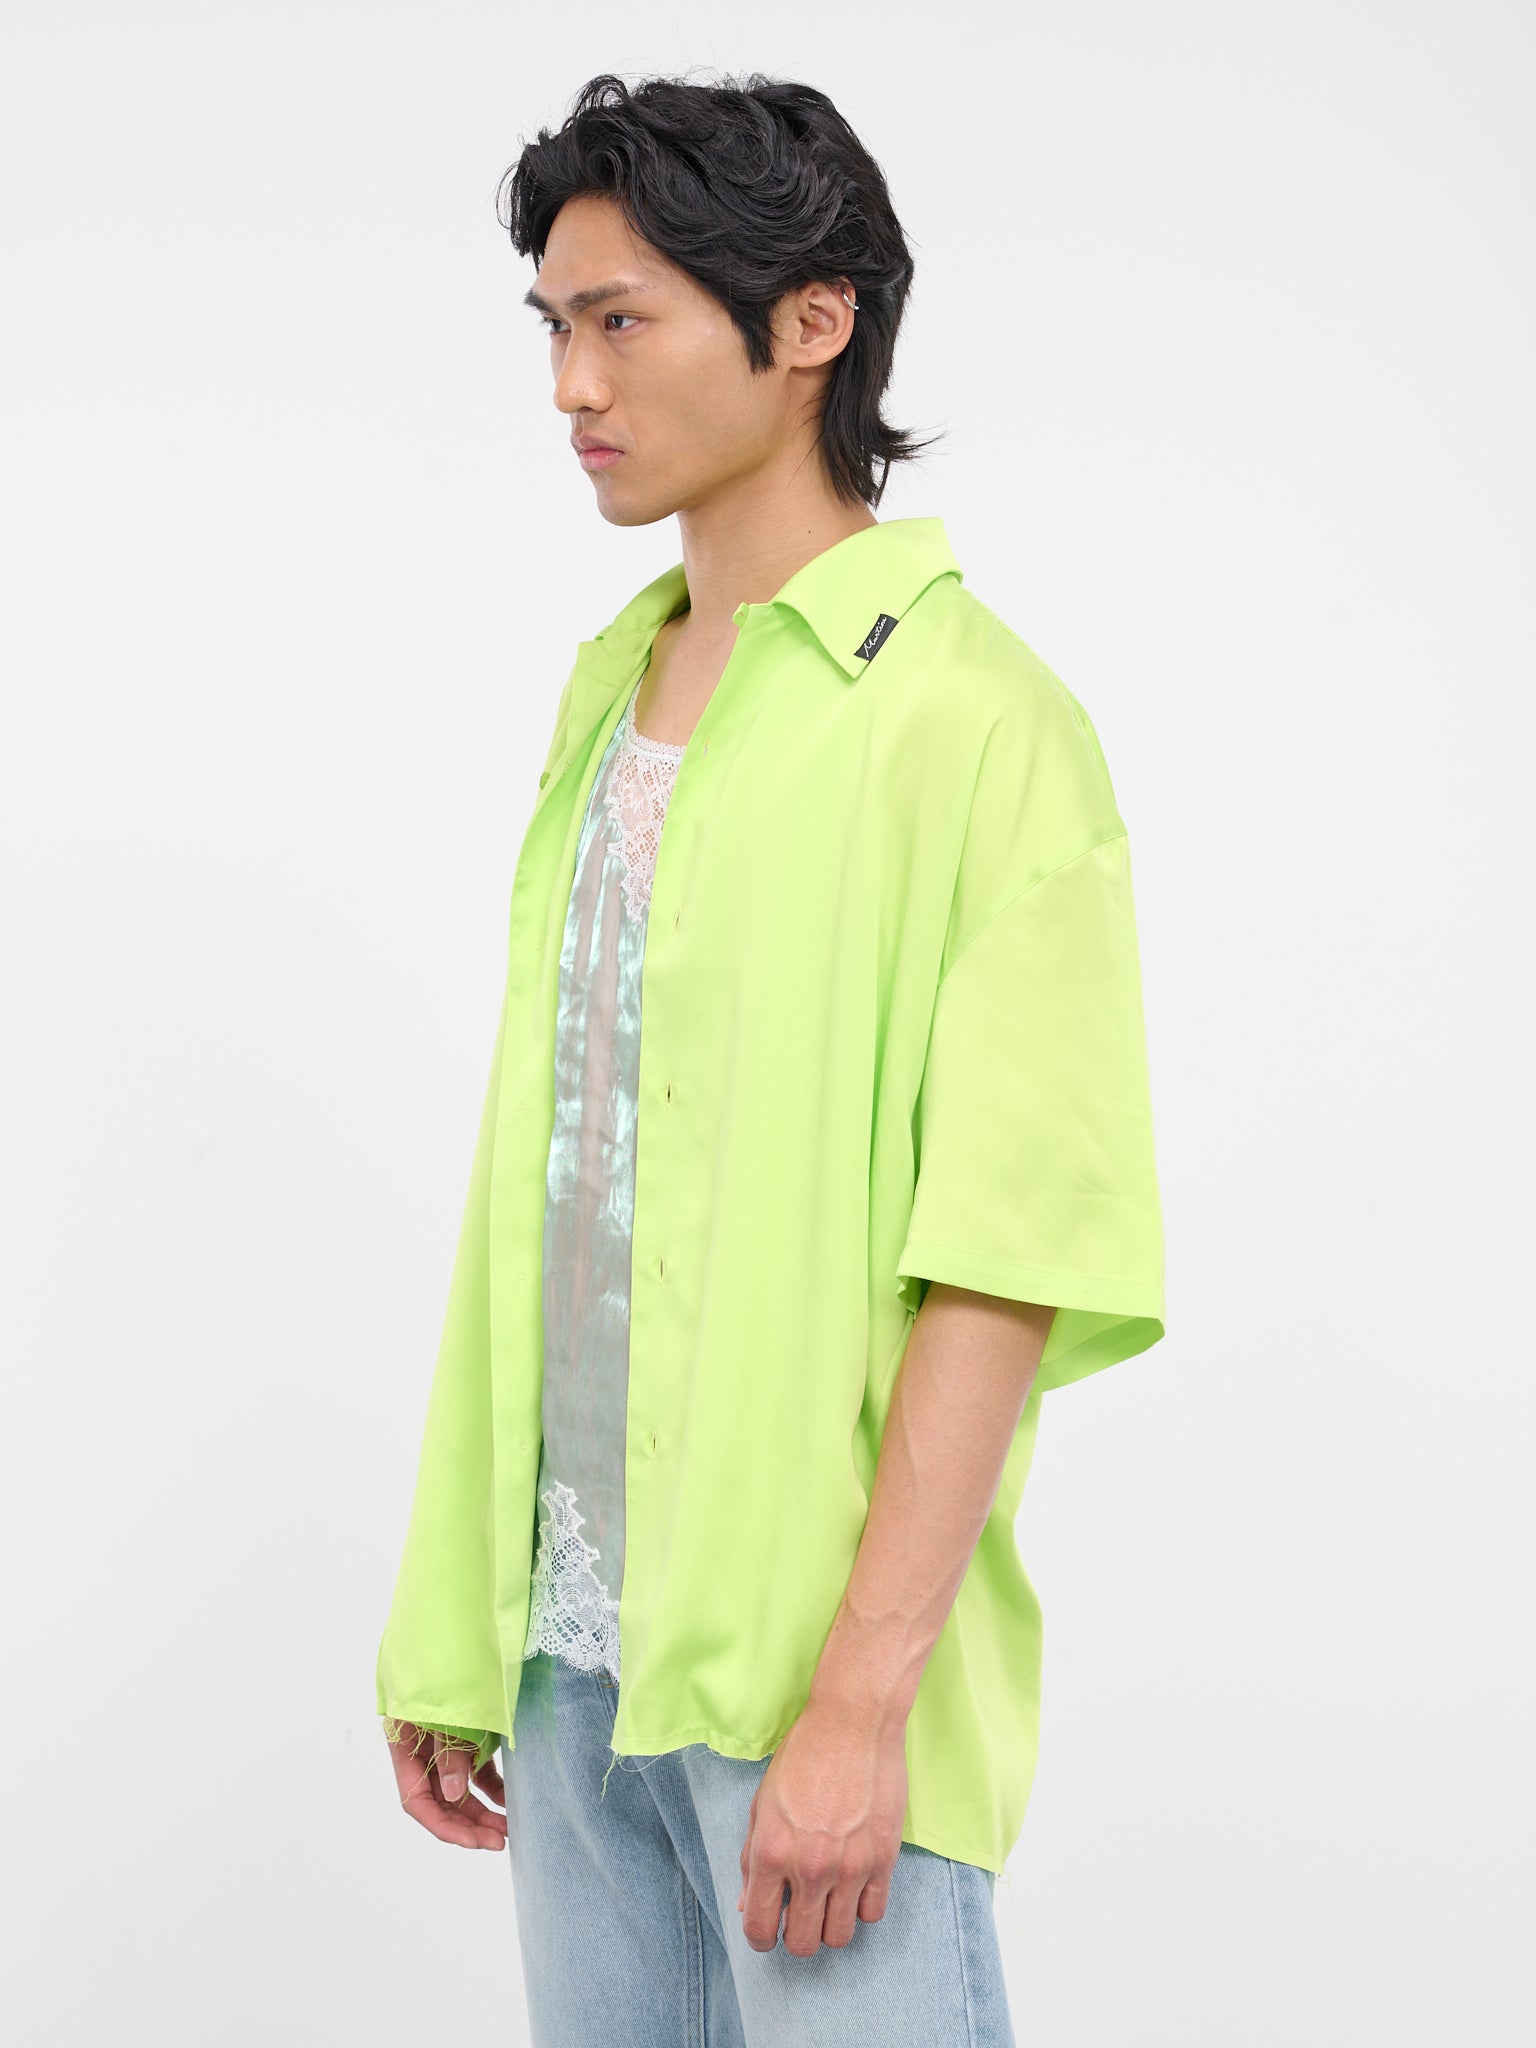 Camisole Shirt (426-LIMIRR-LIME-IRRIDESCENT)